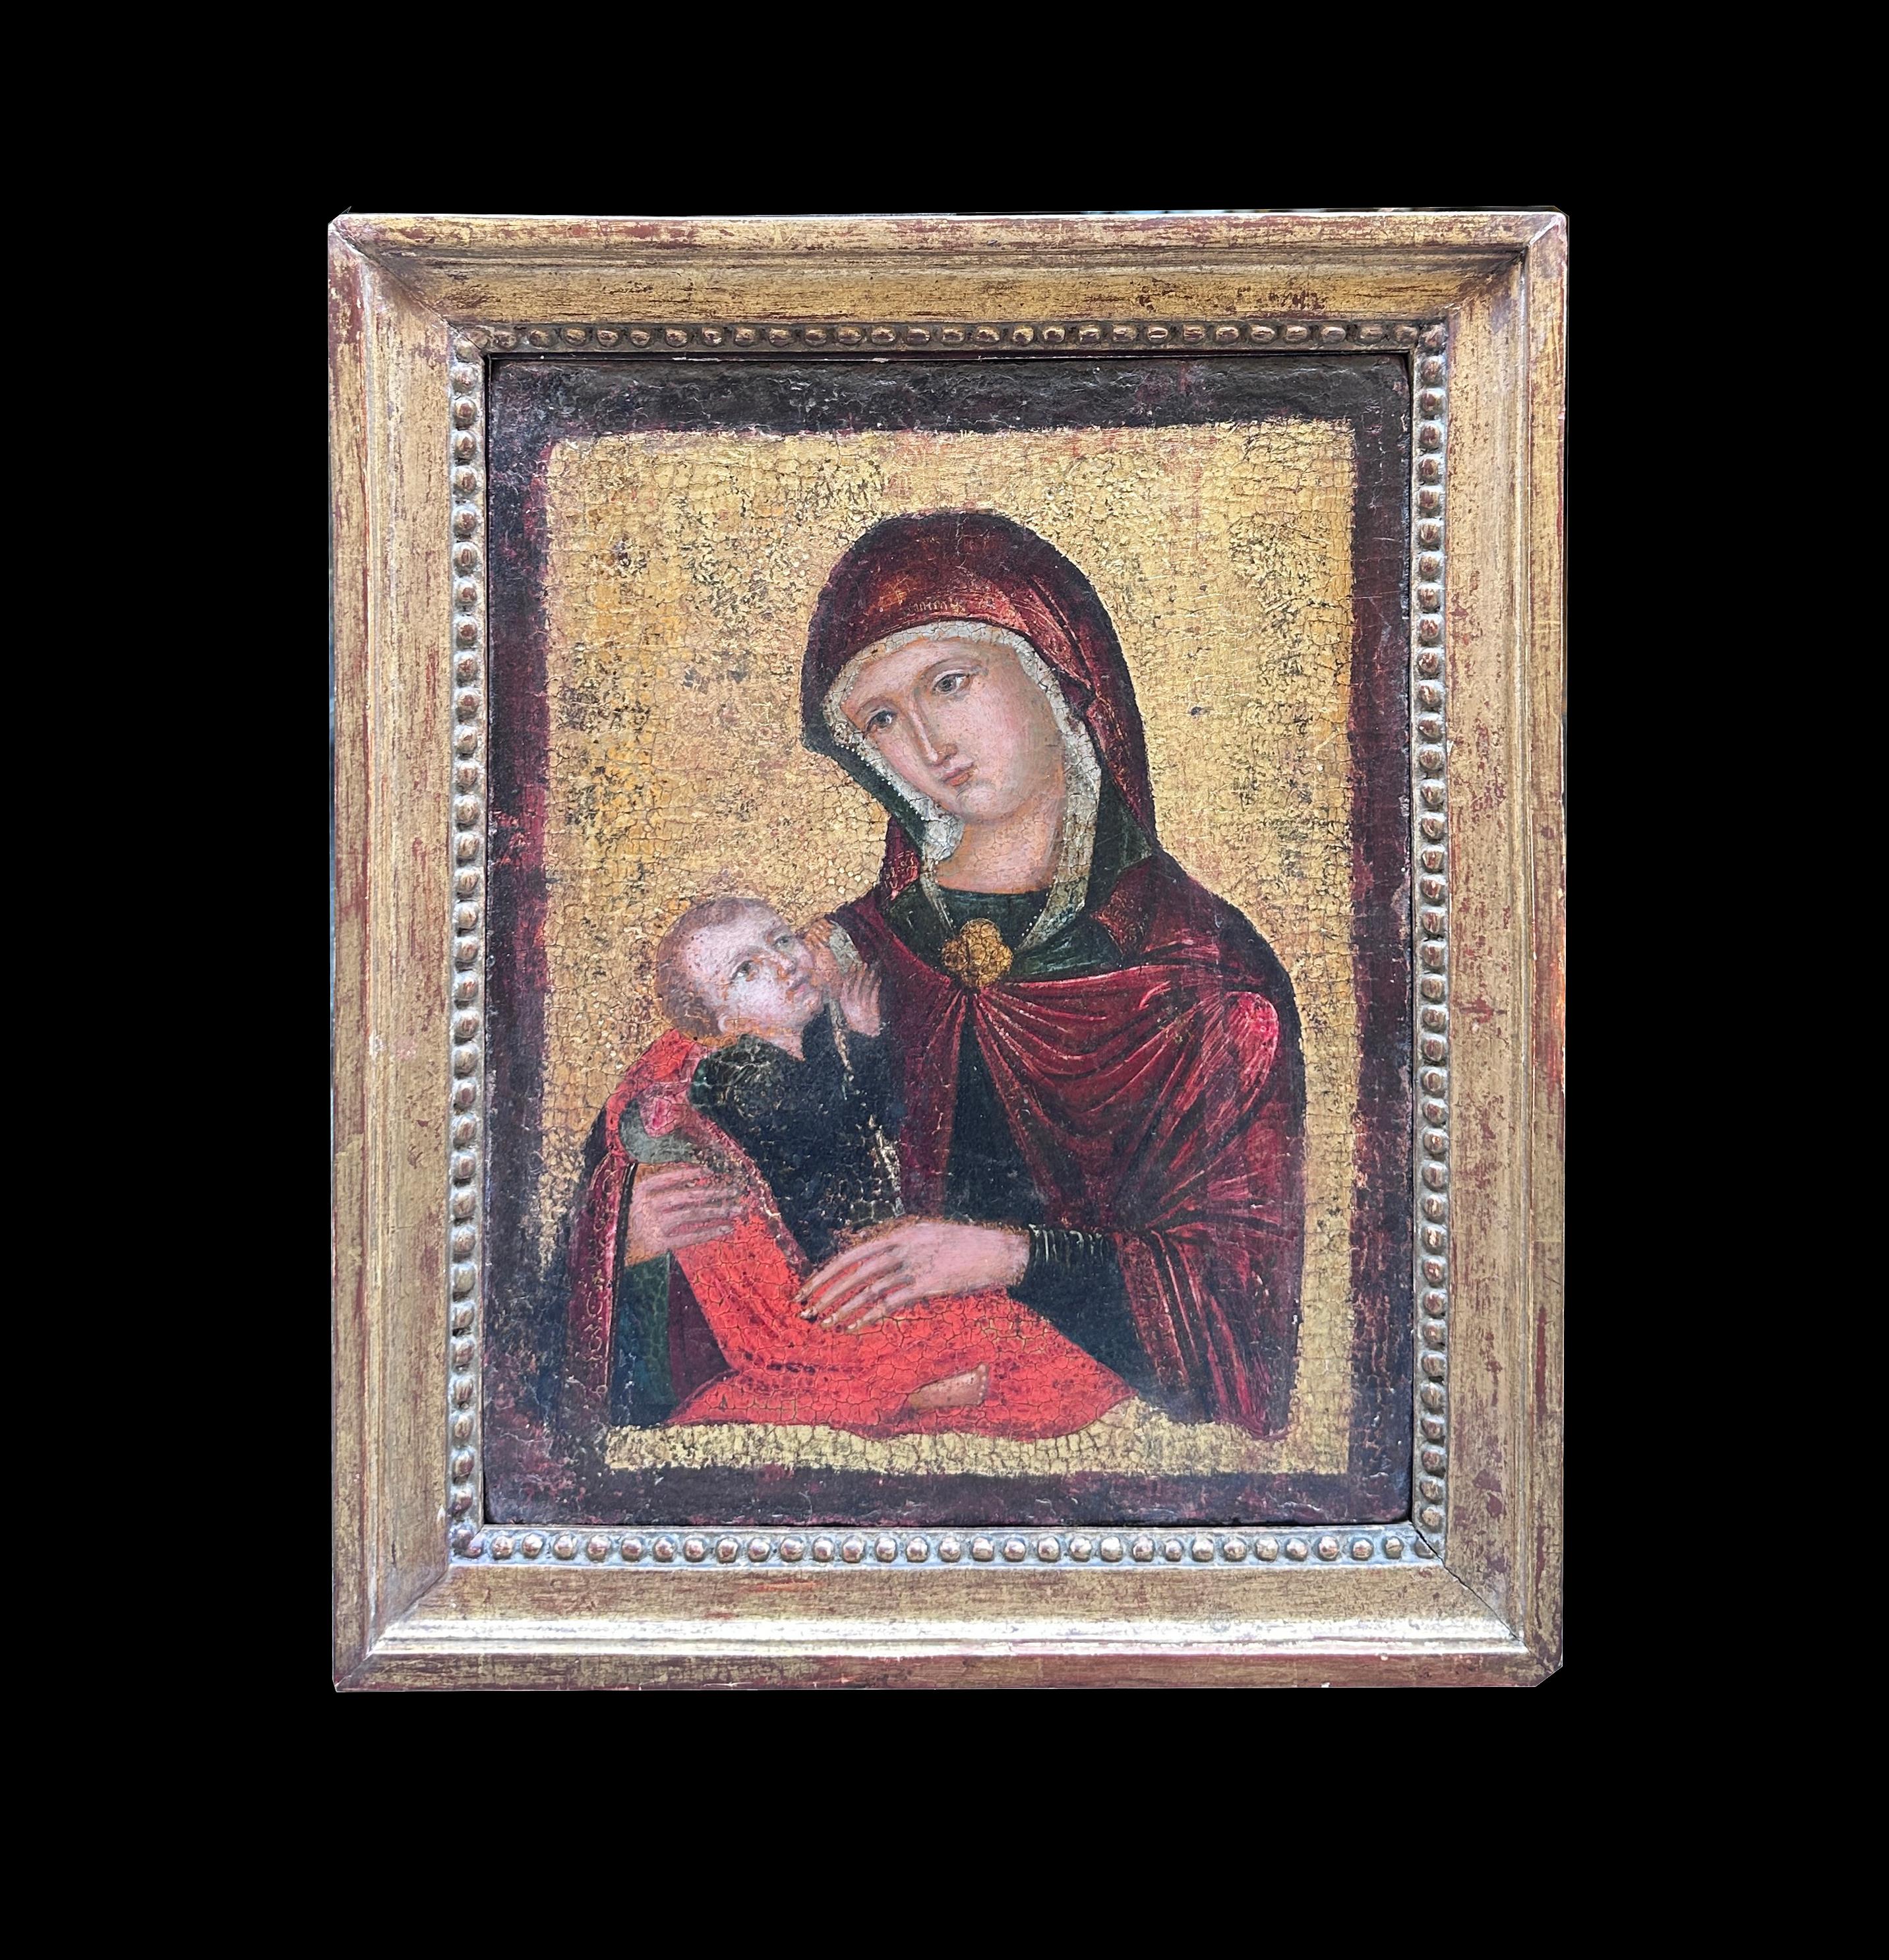 This beautiful work of art concerns a Virgin Mary with Child painted on a walnut tablet with a Venetian golden background, dating back to the 16th century. The technique used is oil painting on a golden chalky background, which gives depth and